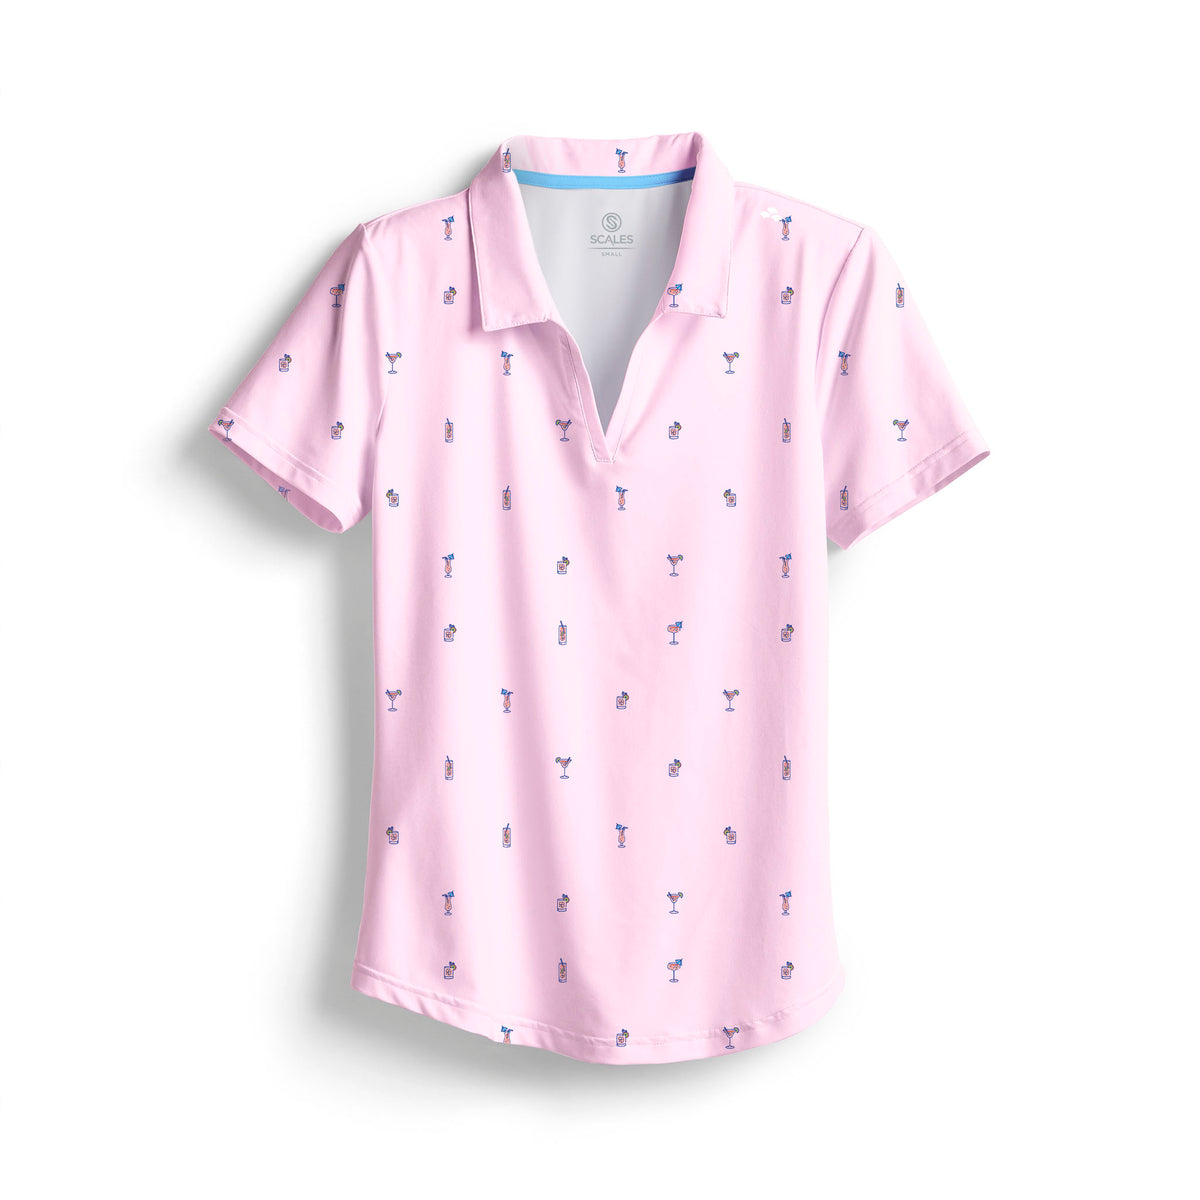 SCALES Cheers Womens Short Sleeve Polo